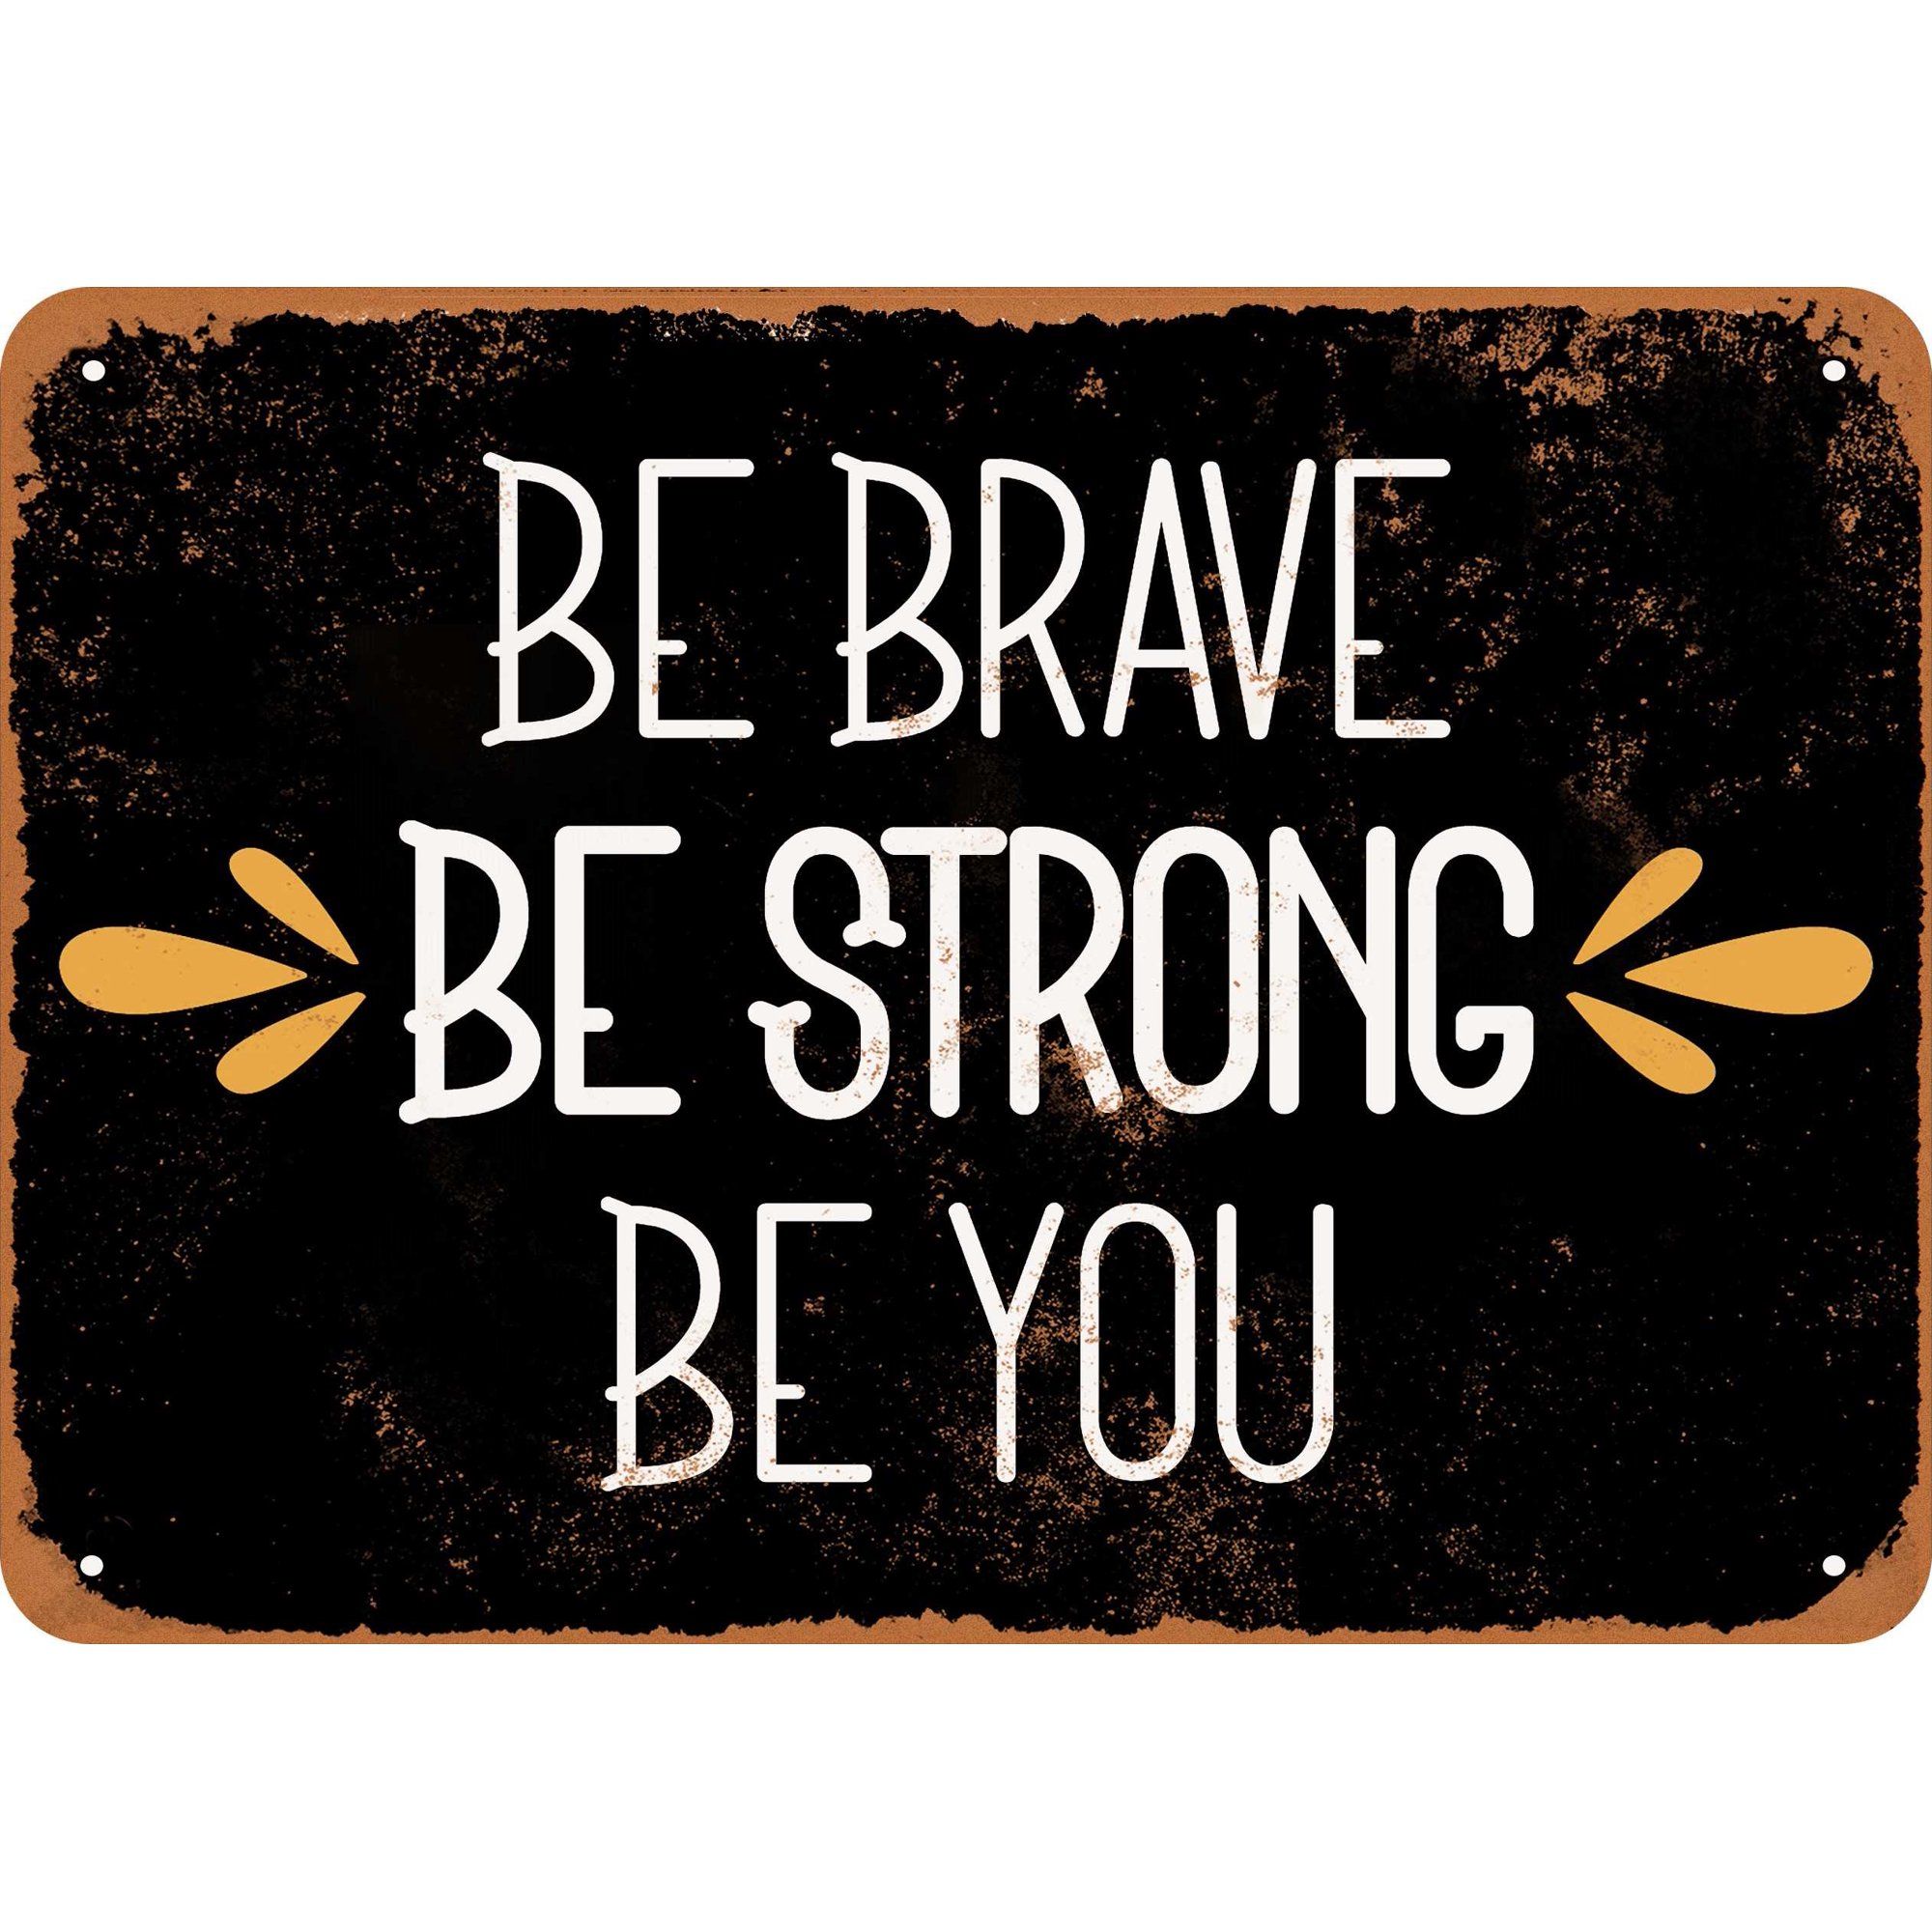 Be Brave Be Strong Be You (Dark Background) Metal Sign - 7x10 inch - Vintage Look | Walmart (US)